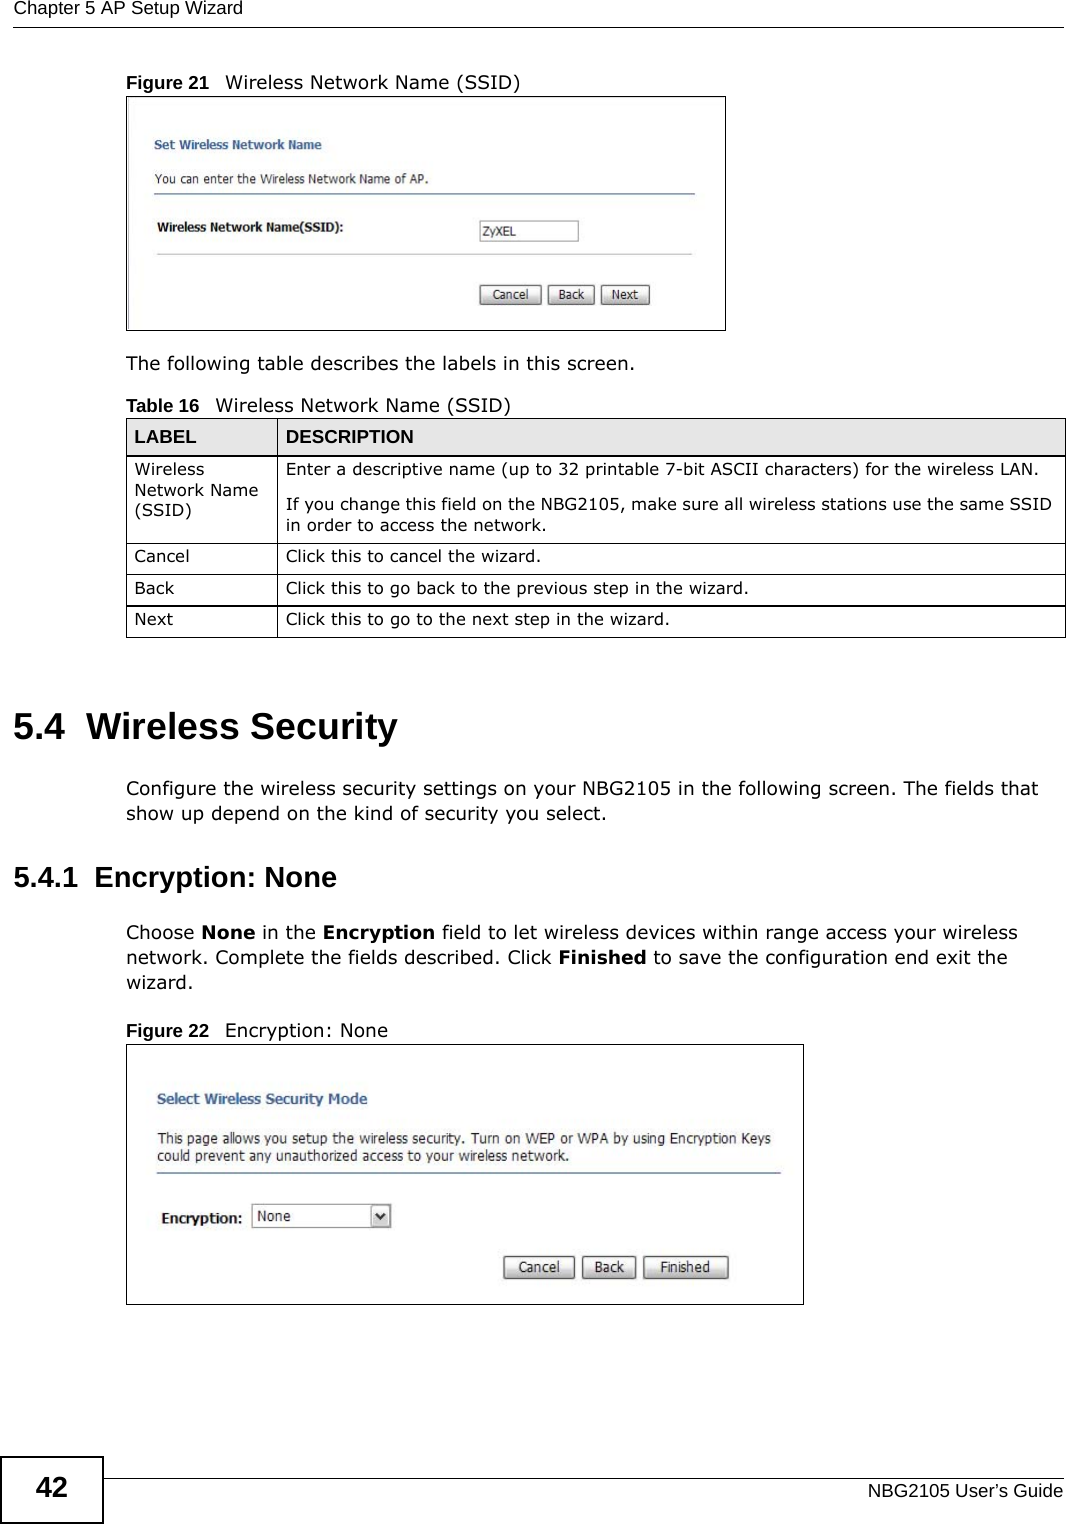 Chapter 5 AP Setup WizardNBG2105 User’s Guide42Figure 21   Wireless Network Name (SSID) The following table describes the labels in this screen.5.4  Wireless SecurityConfigure the wireless security settings on your NBG2105 in the following screen. The fields that show up depend on the kind of security you select.5.4.1  Encryption: NoneChoose None in the Encryption field to let wireless devices within range access your wireless network. Complete the fields described. Click Finished to save the configuration end exit the wizard.Figure 22   Encryption: None Table 16   Wireless Network Name (SSID)LABEL DESCRIPTIONWireless Network Name (SSID)Enter a descriptive name (up to 32 printable 7-bit ASCII characters) for the wireless LAN. If you change this field on the NBG2105, make sure all wireless stations use the same SSID in order to access the network. Cancel Click this to cancel the wizard.Back Click this to go back to the previous step in the wizard.Next Click this to go to the next step in the wizard.